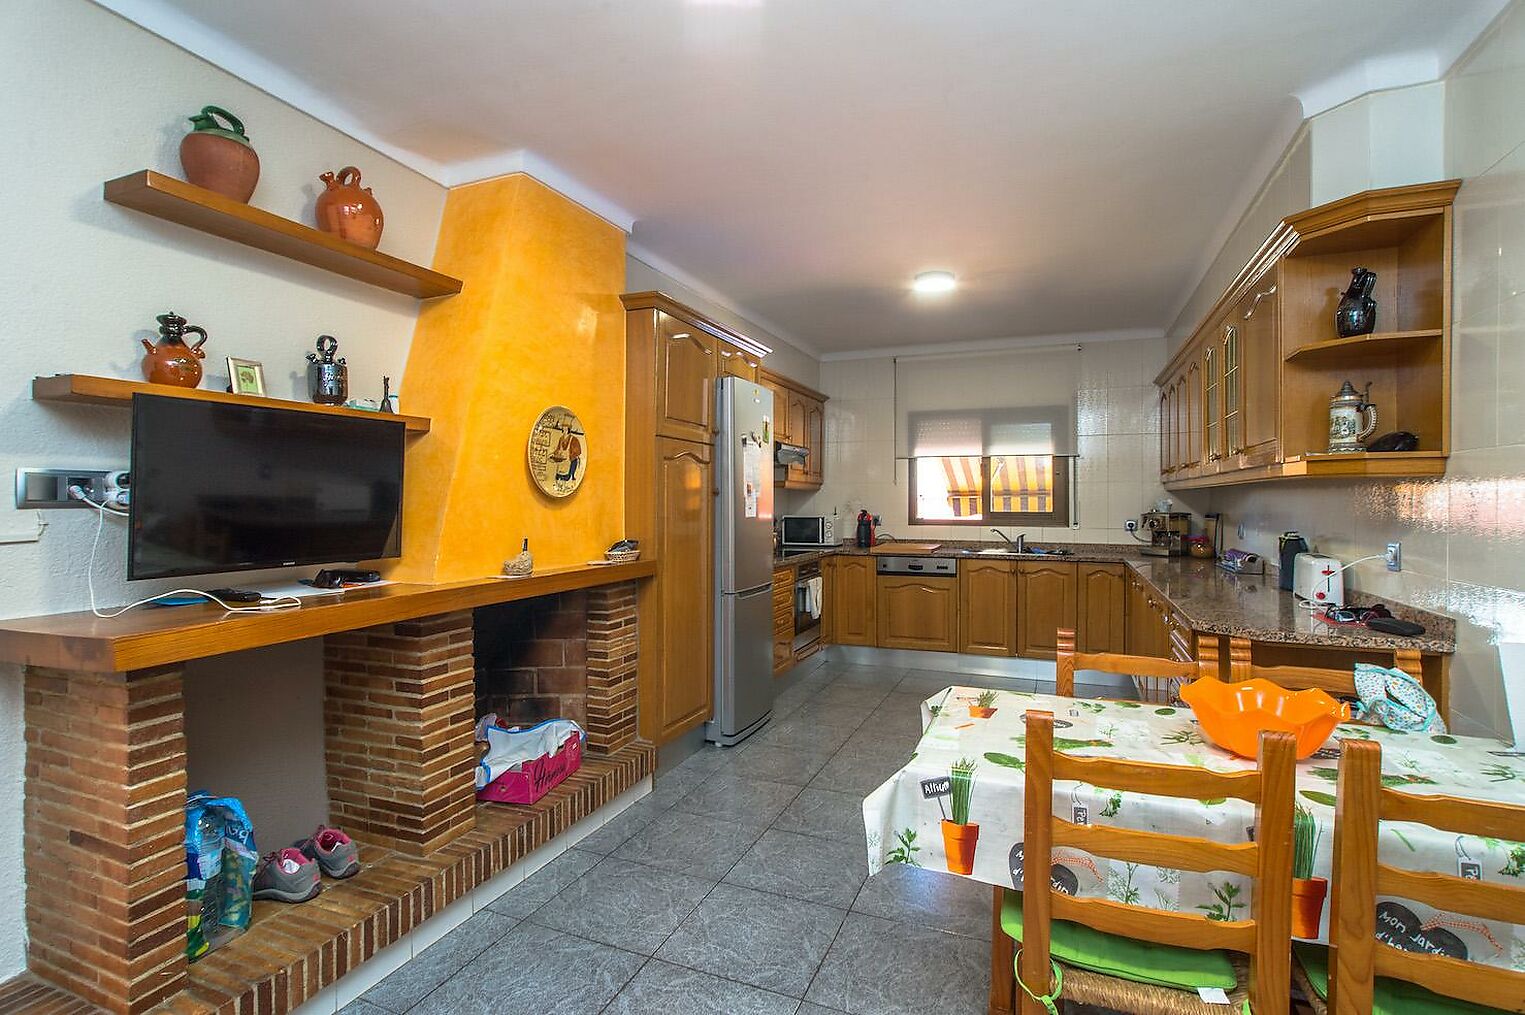 A superbly presented villa in the heart of the beautiful pueblo of Castell  d'Aro.